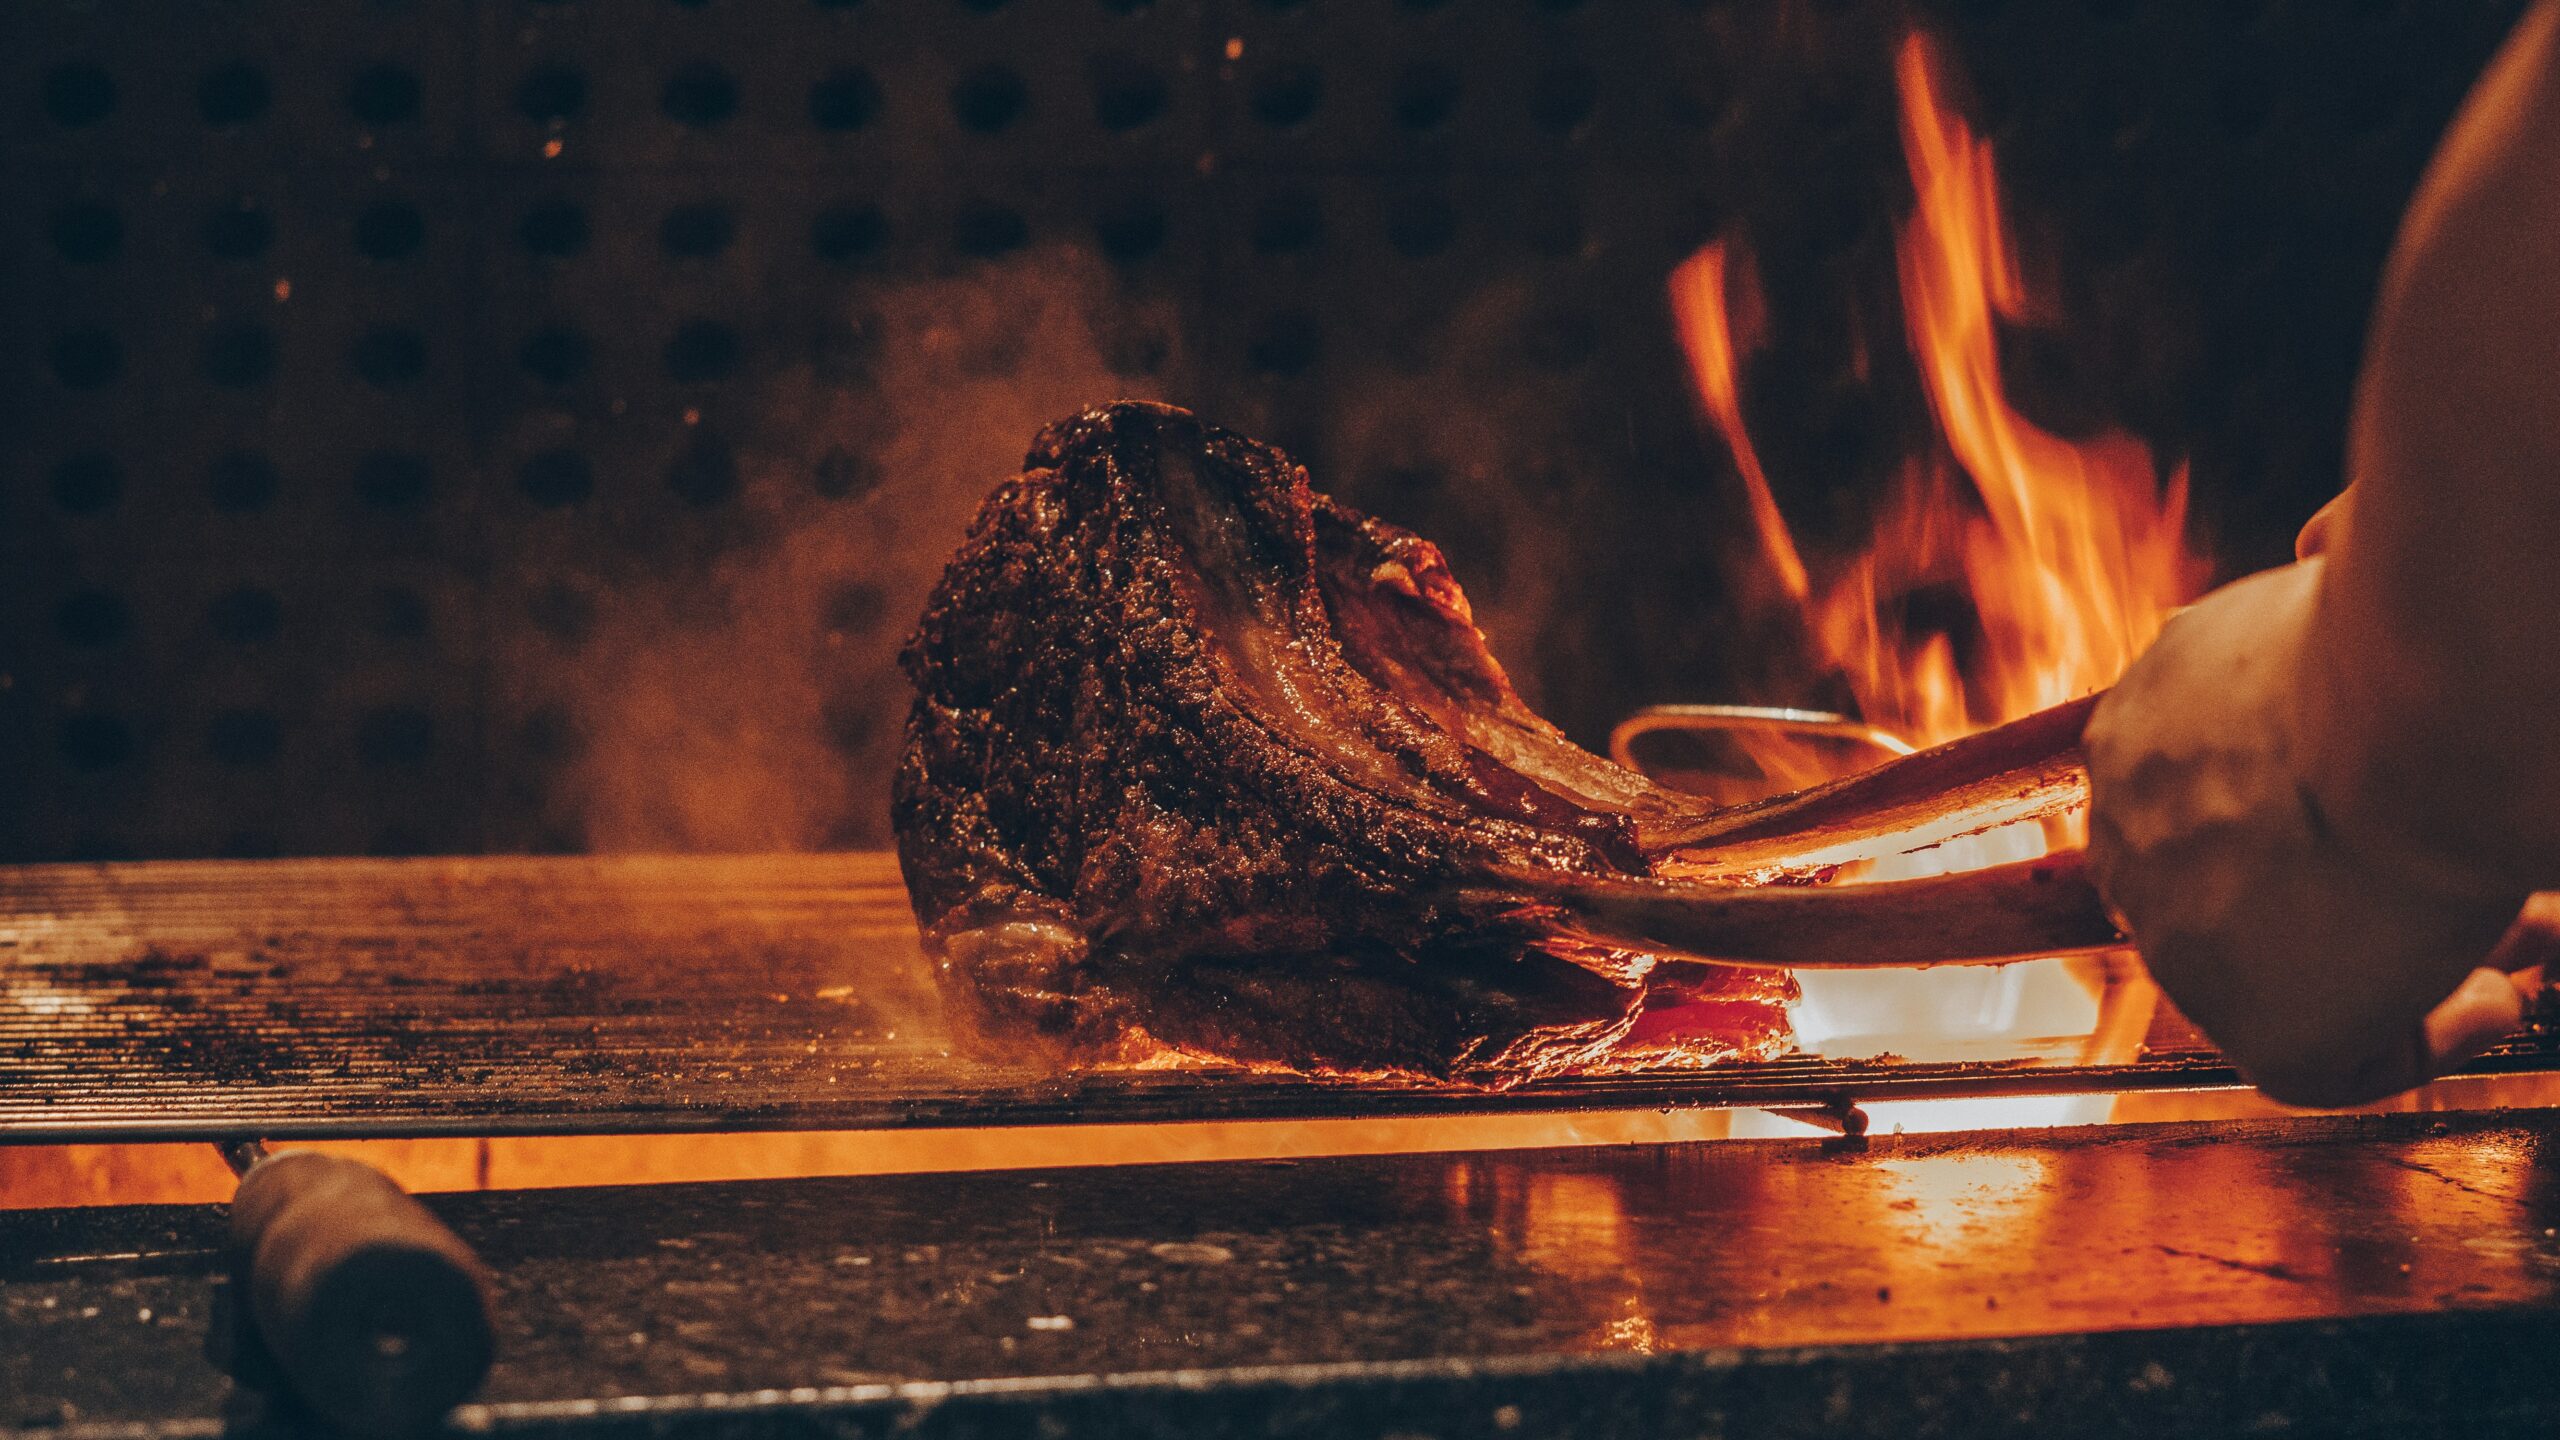 An enormous slab of meat being cooked on a fiery grill